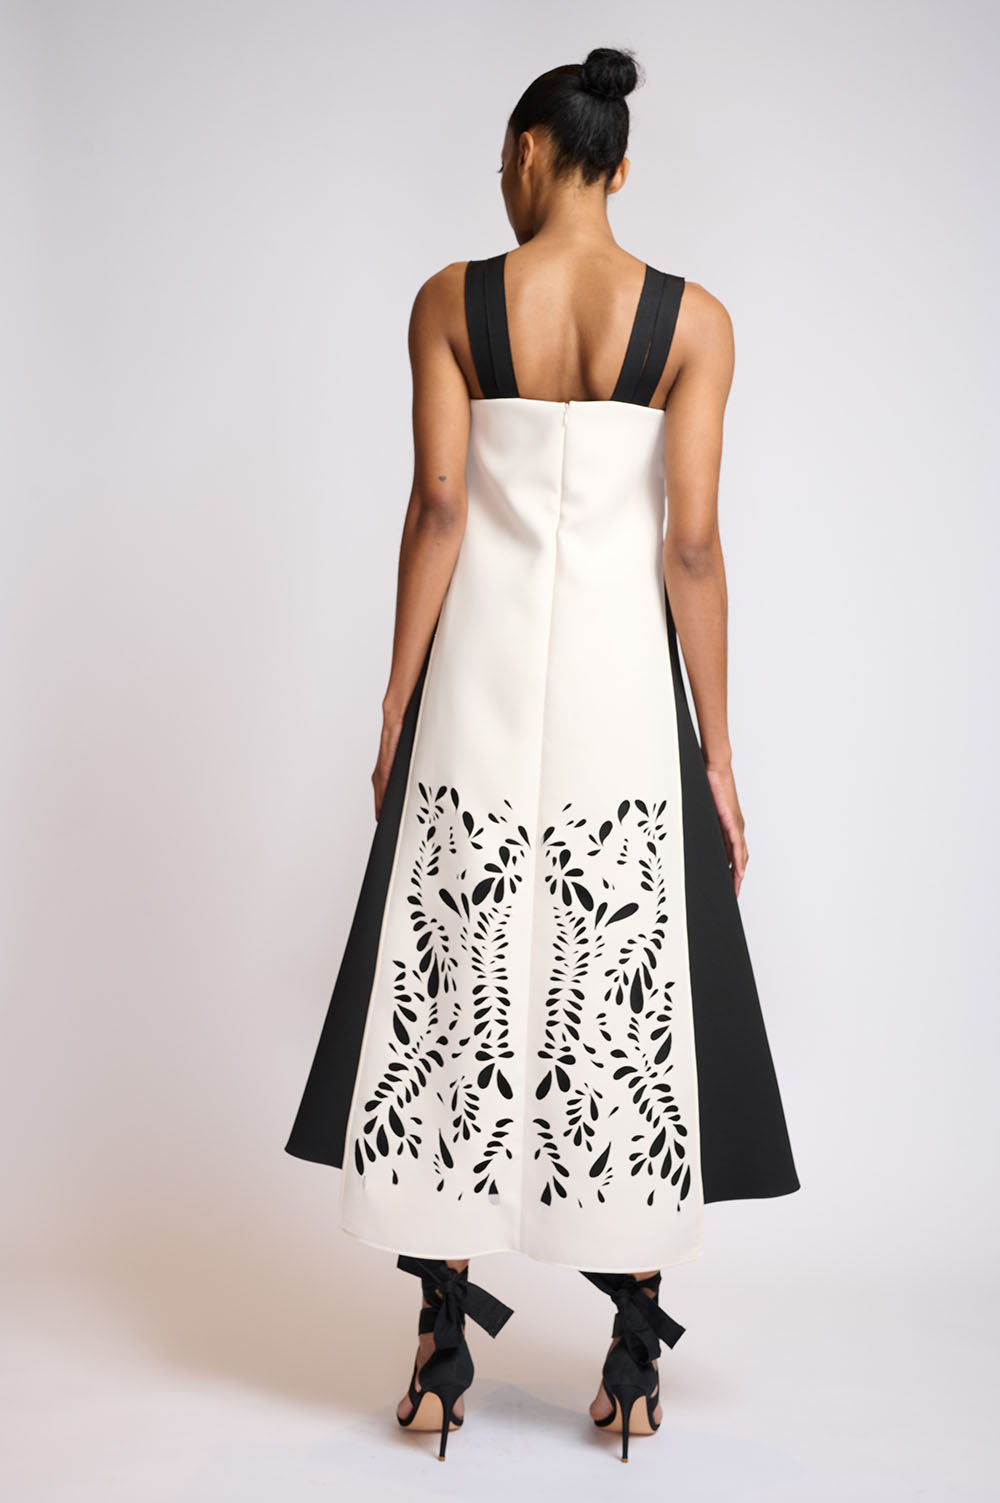 Porcelain and Onyx Cady Sheath Dress with Floral Precision Cut Overlay 3